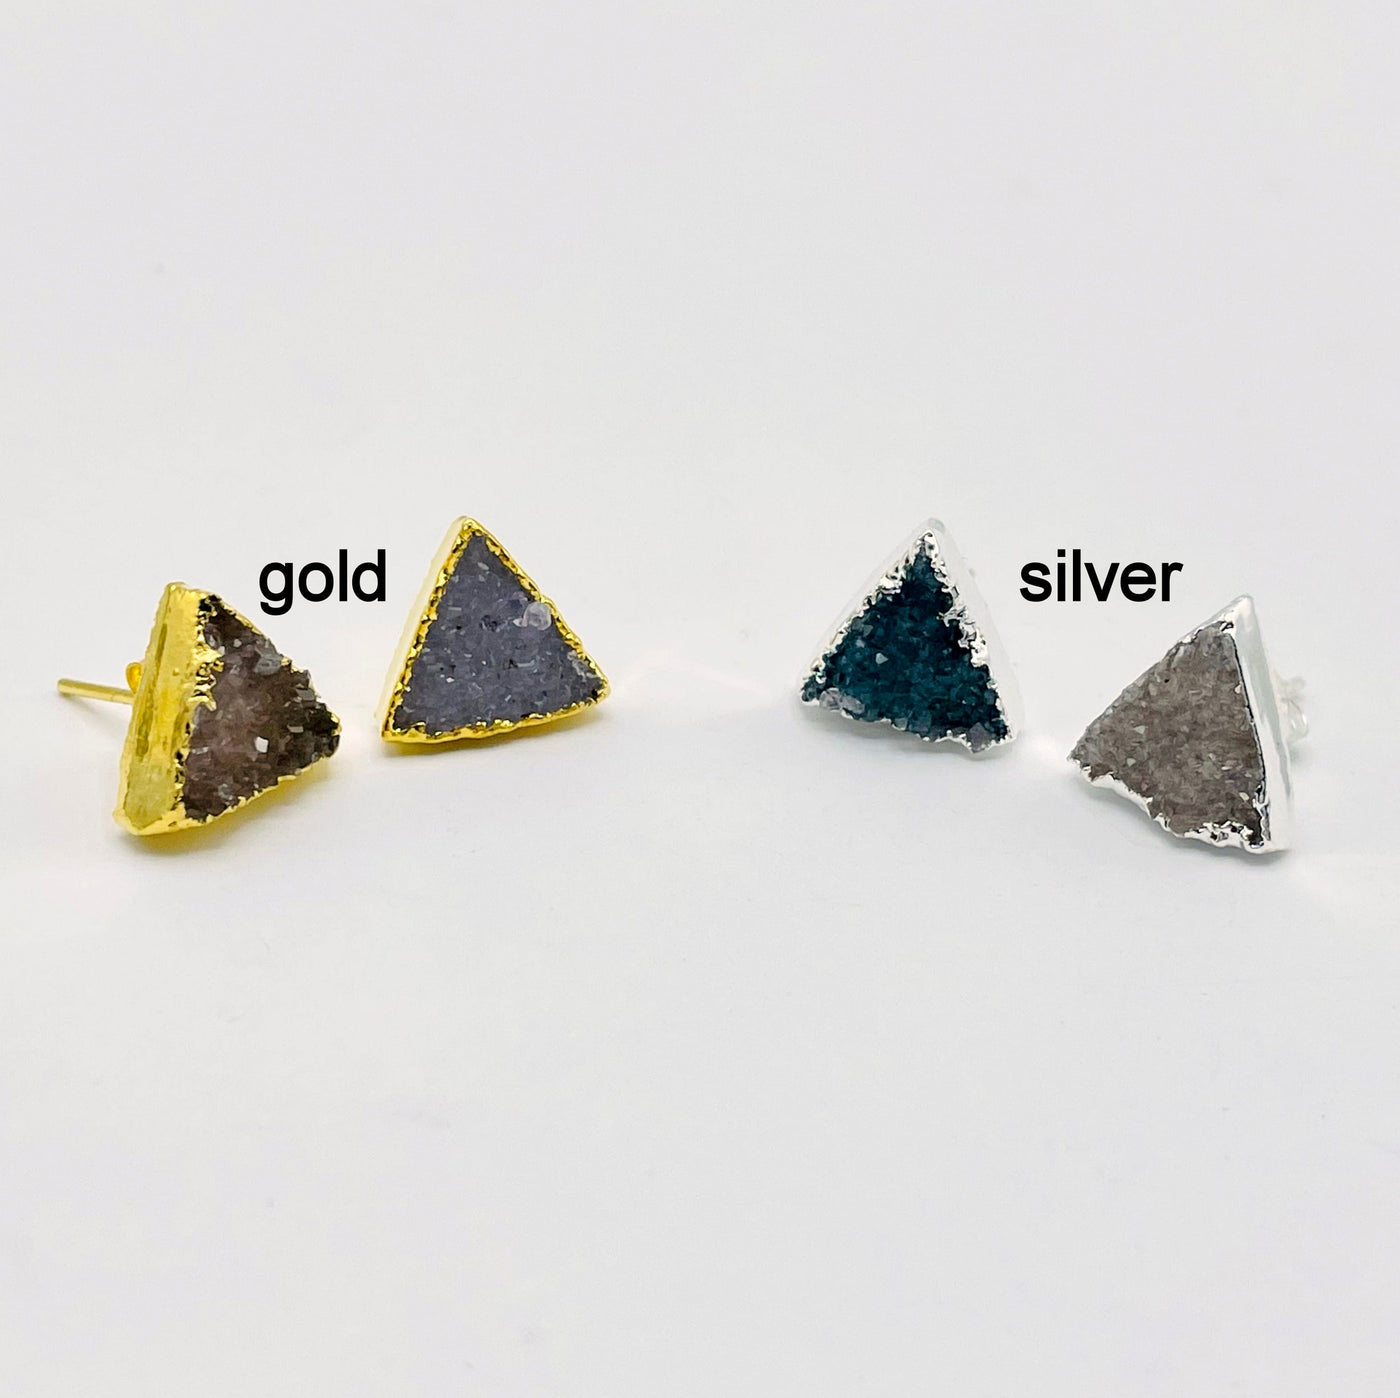 one pair of gold and one pair of silver natural druzy triangle stud earrings on white background for finish comparison